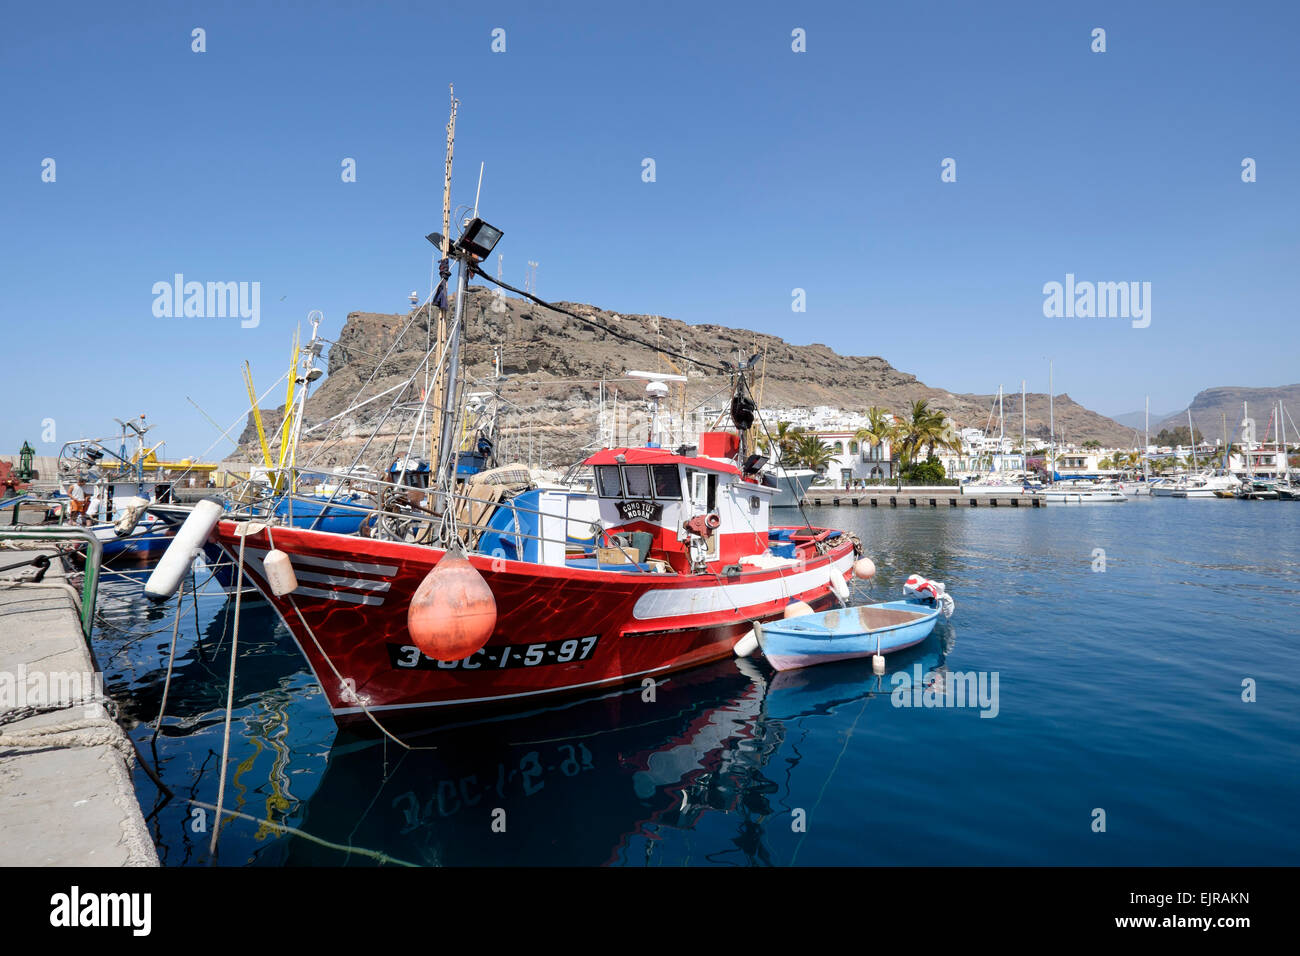 Fishing boats moored in the harbour at Puerto de Mogan, Gran Canaria, Spain Stock Photo